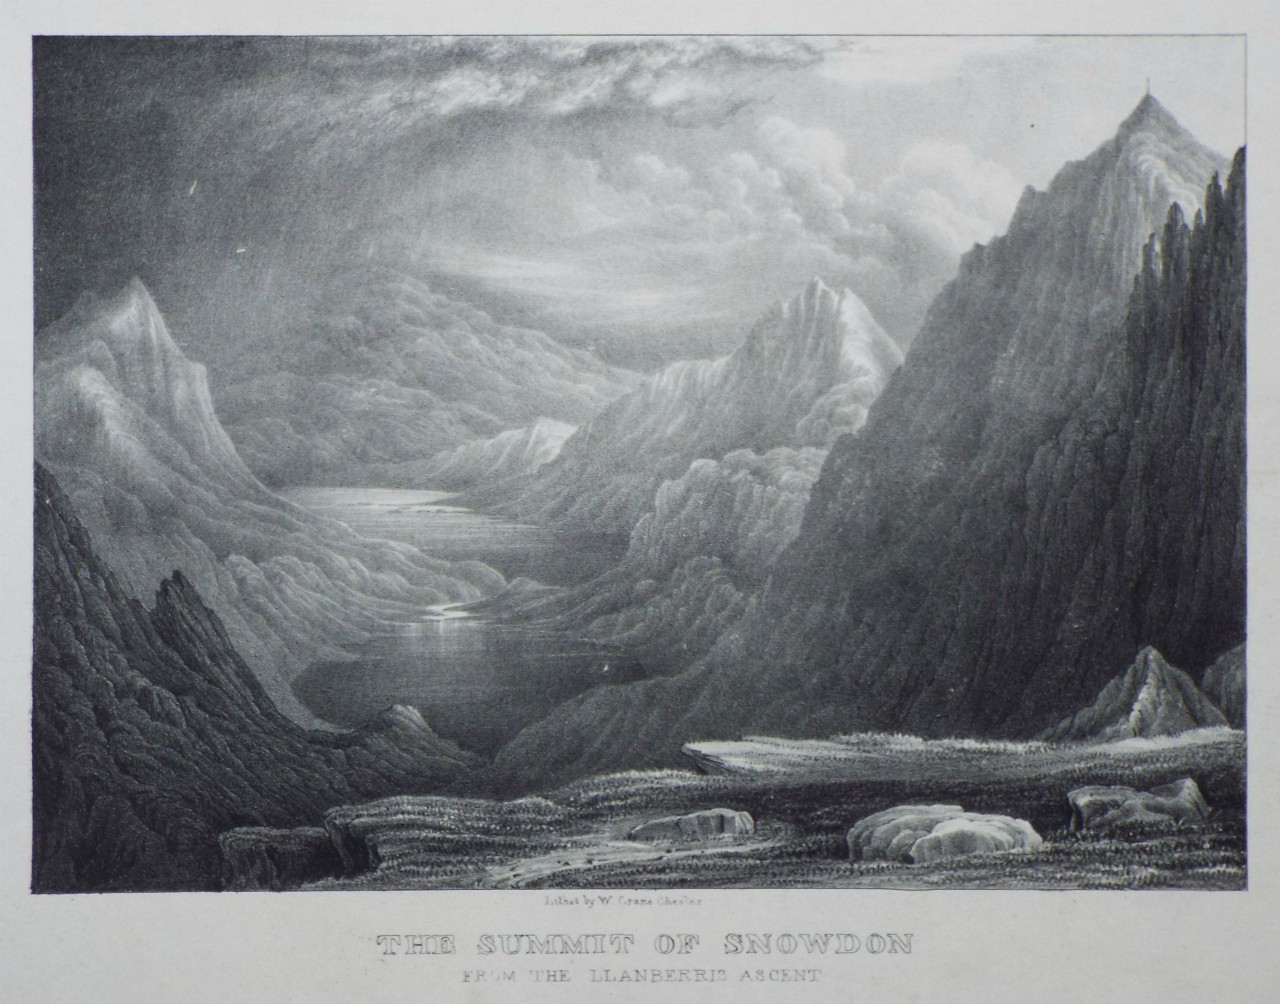 Lithograph - The Summit of Snowdon from the Llanberis Ascent - Crane